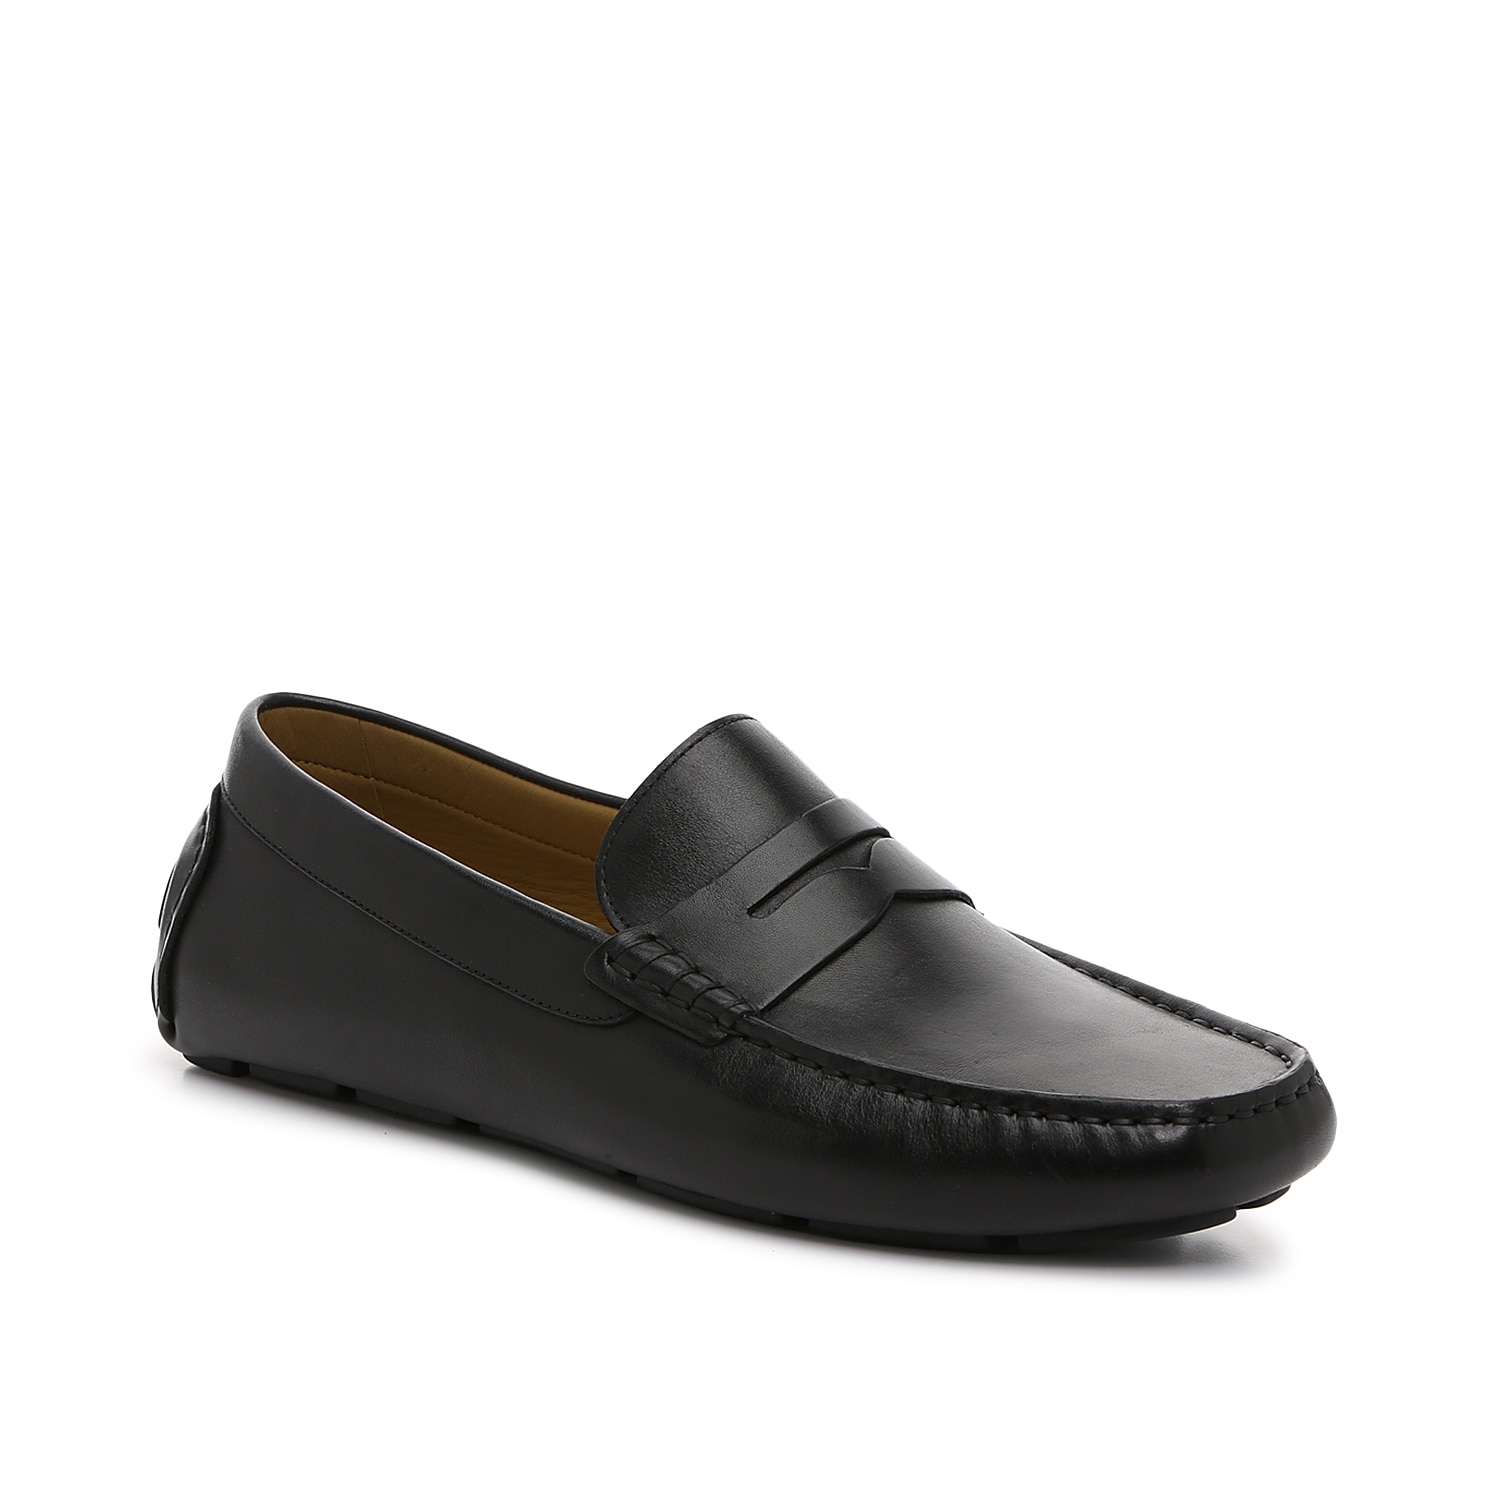 Vince Camuto Esmail Penny Loafer | Men's | Black | Size 10.5 | Loafers | Drivers | Penny